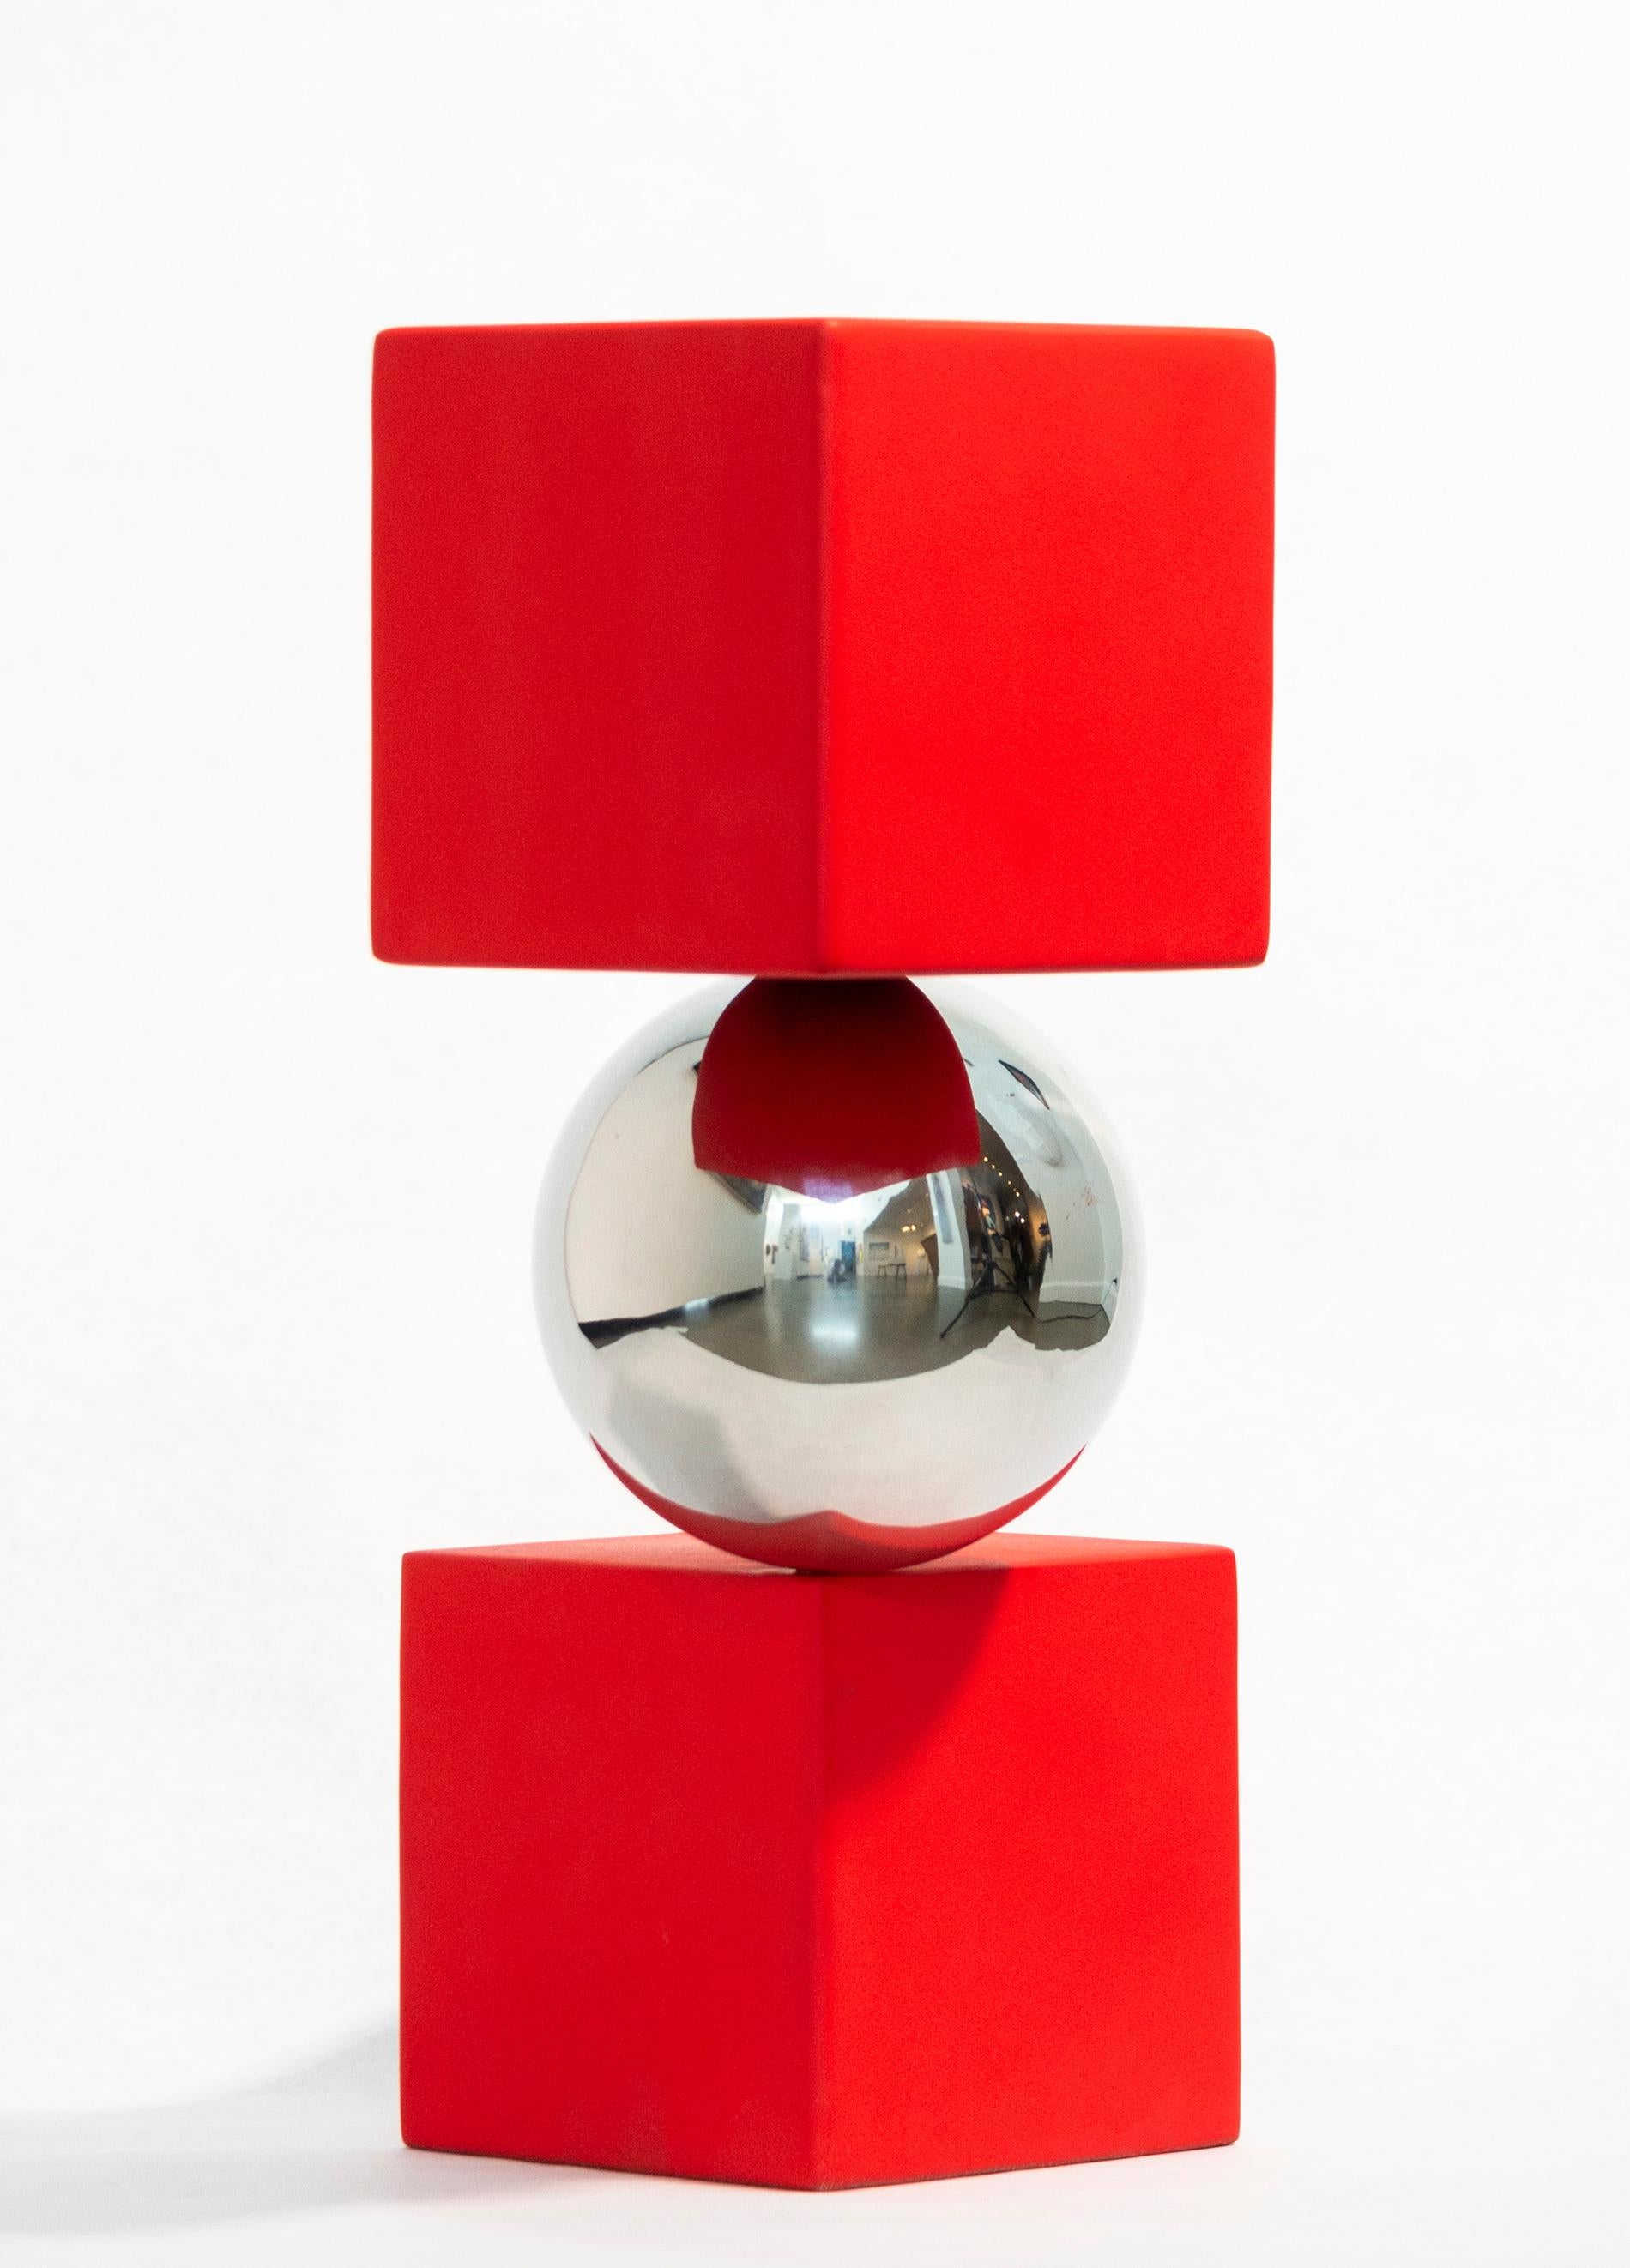 Philippe Pallafray’s dramatic contemporary sculptures often appear to defy the laws of gravity. This imposing minimalist piece features a highly polished stainless steel ball precariously balanced between two bright red painted cubes. ‘Equilibre’